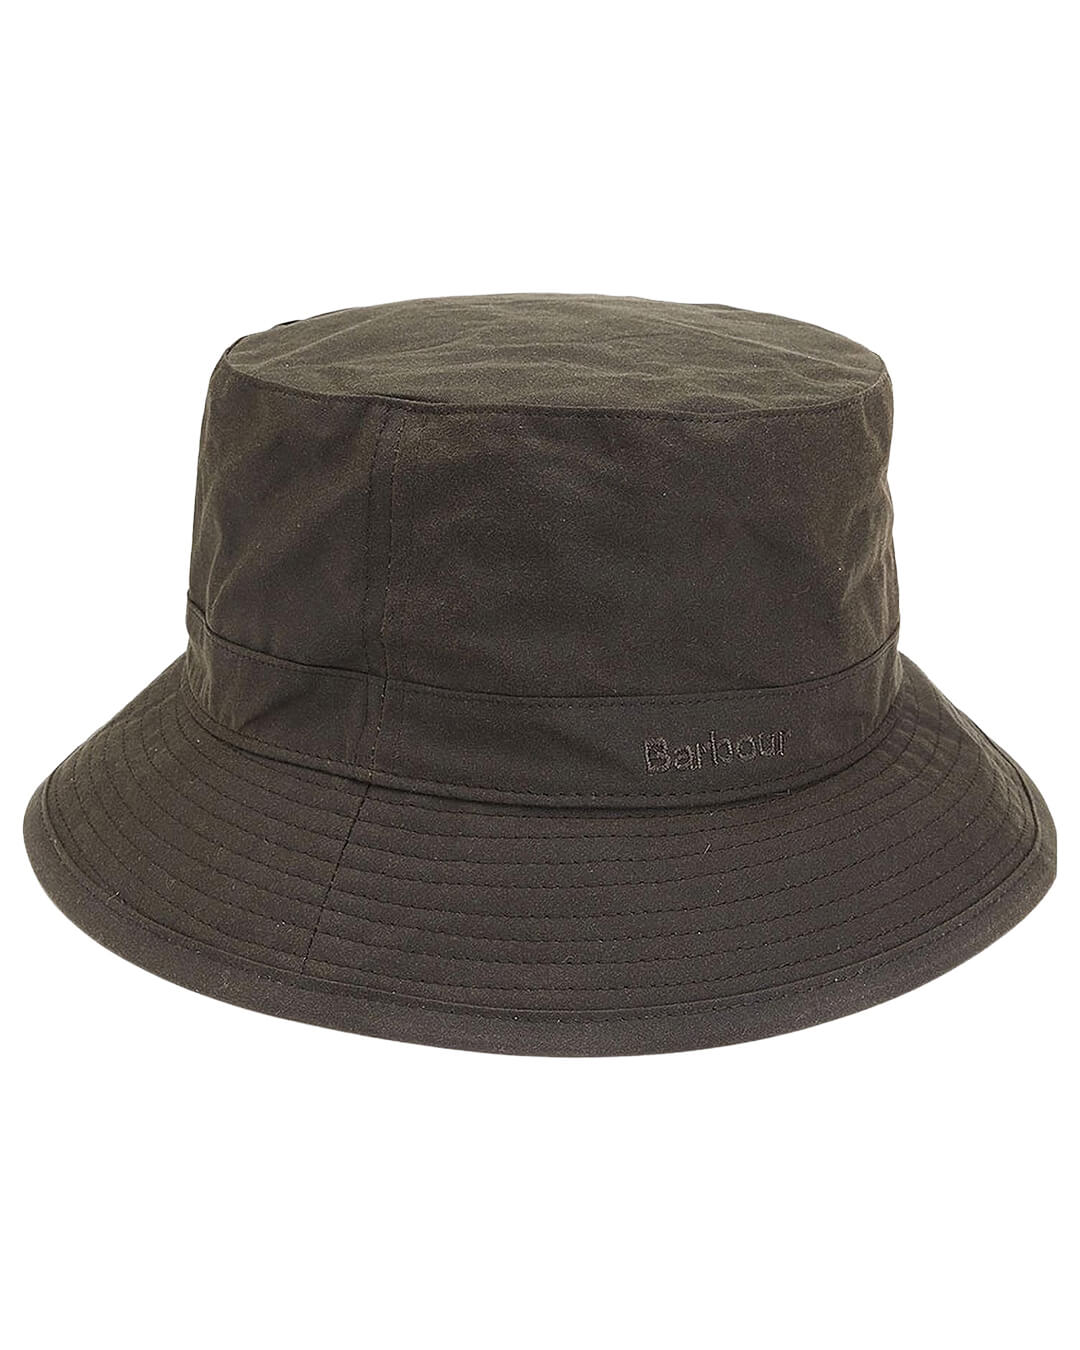 Barbour Hats Barbour Wax Green Sports Hat